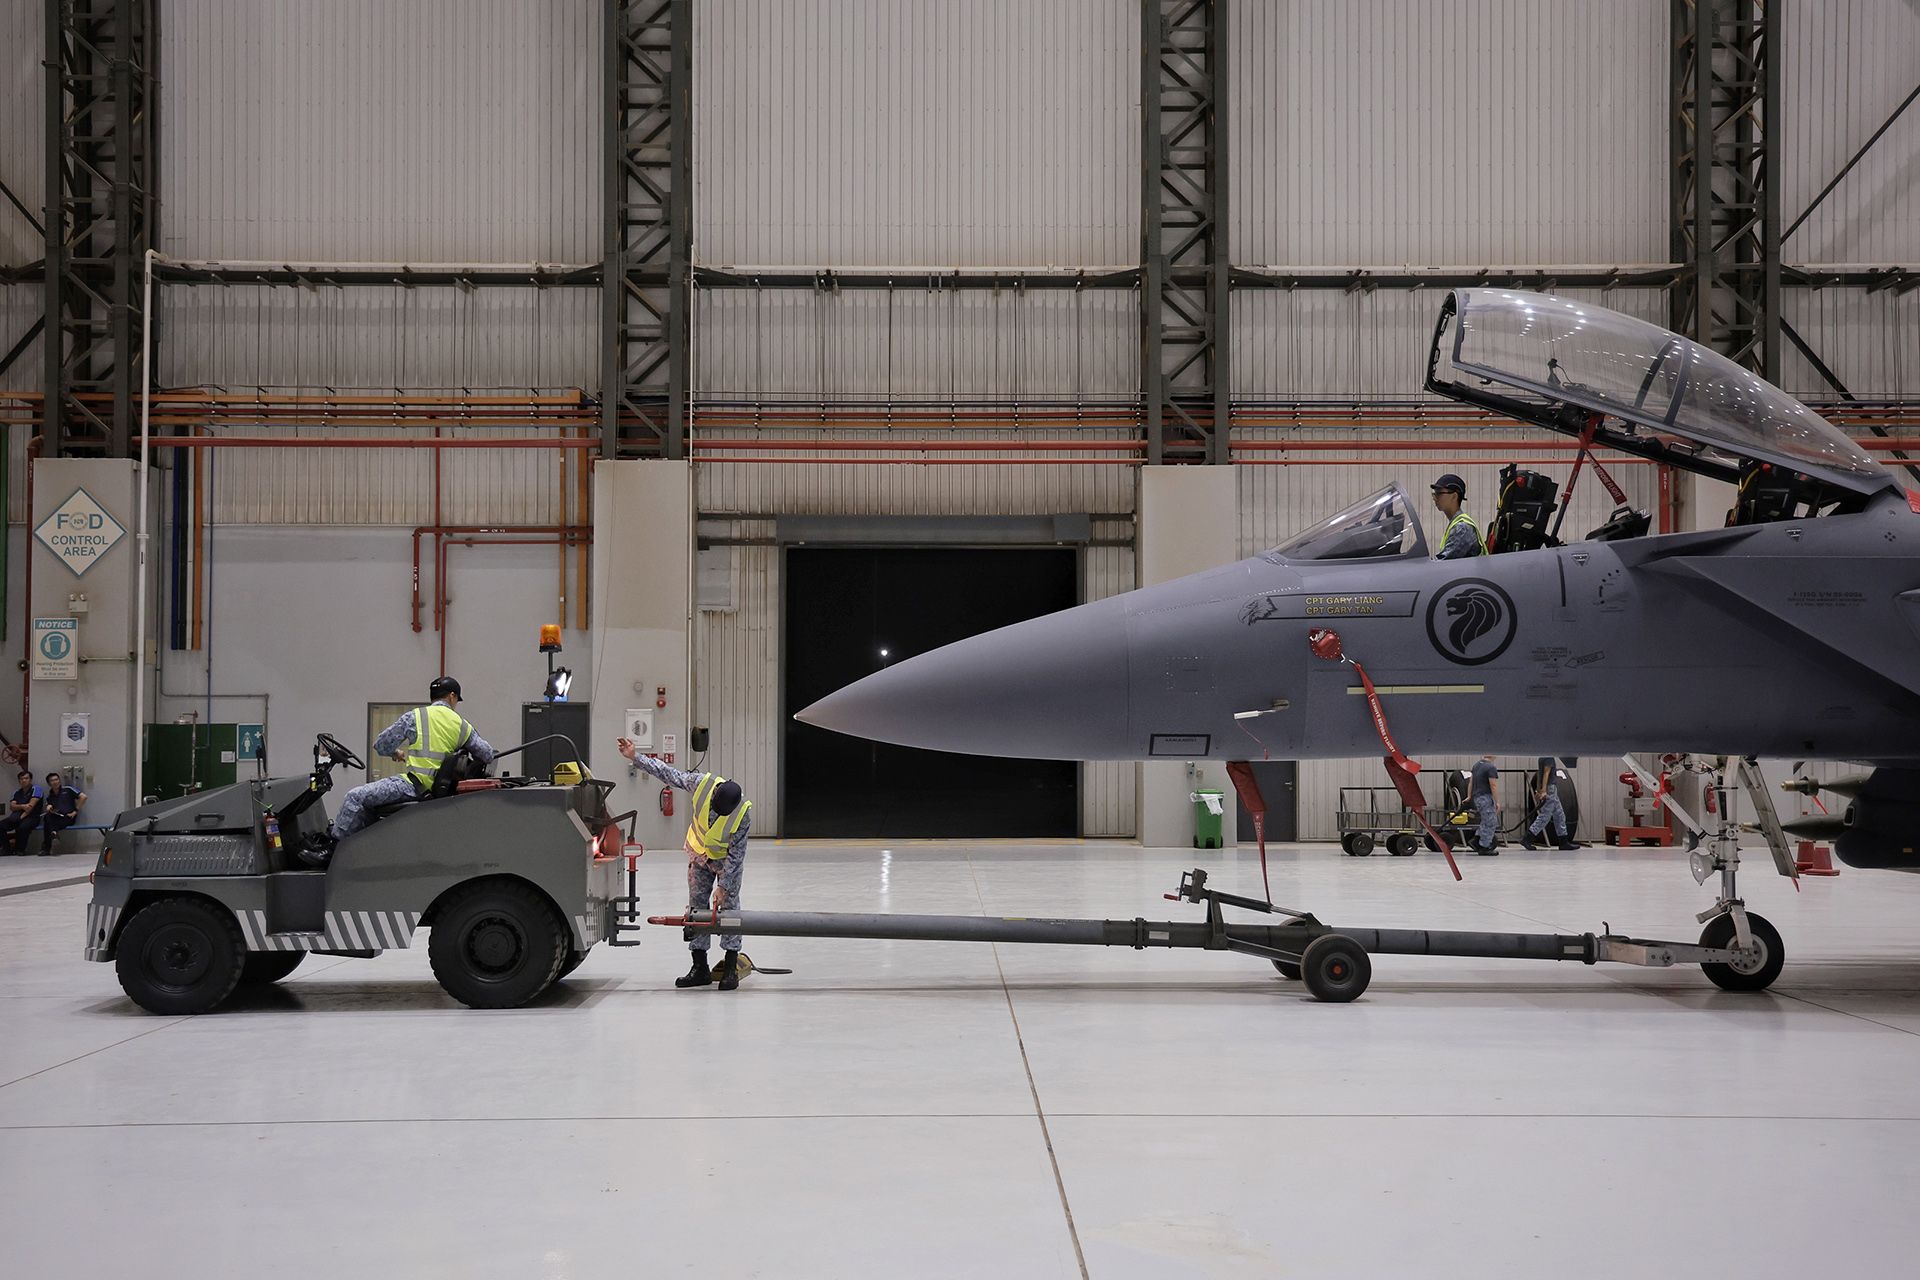 RSAF servicemen preparing to tow the F-15SG from the hangar in Changi Air Base (East) on Feb 13. ST PHOTO: KEVIN LIM